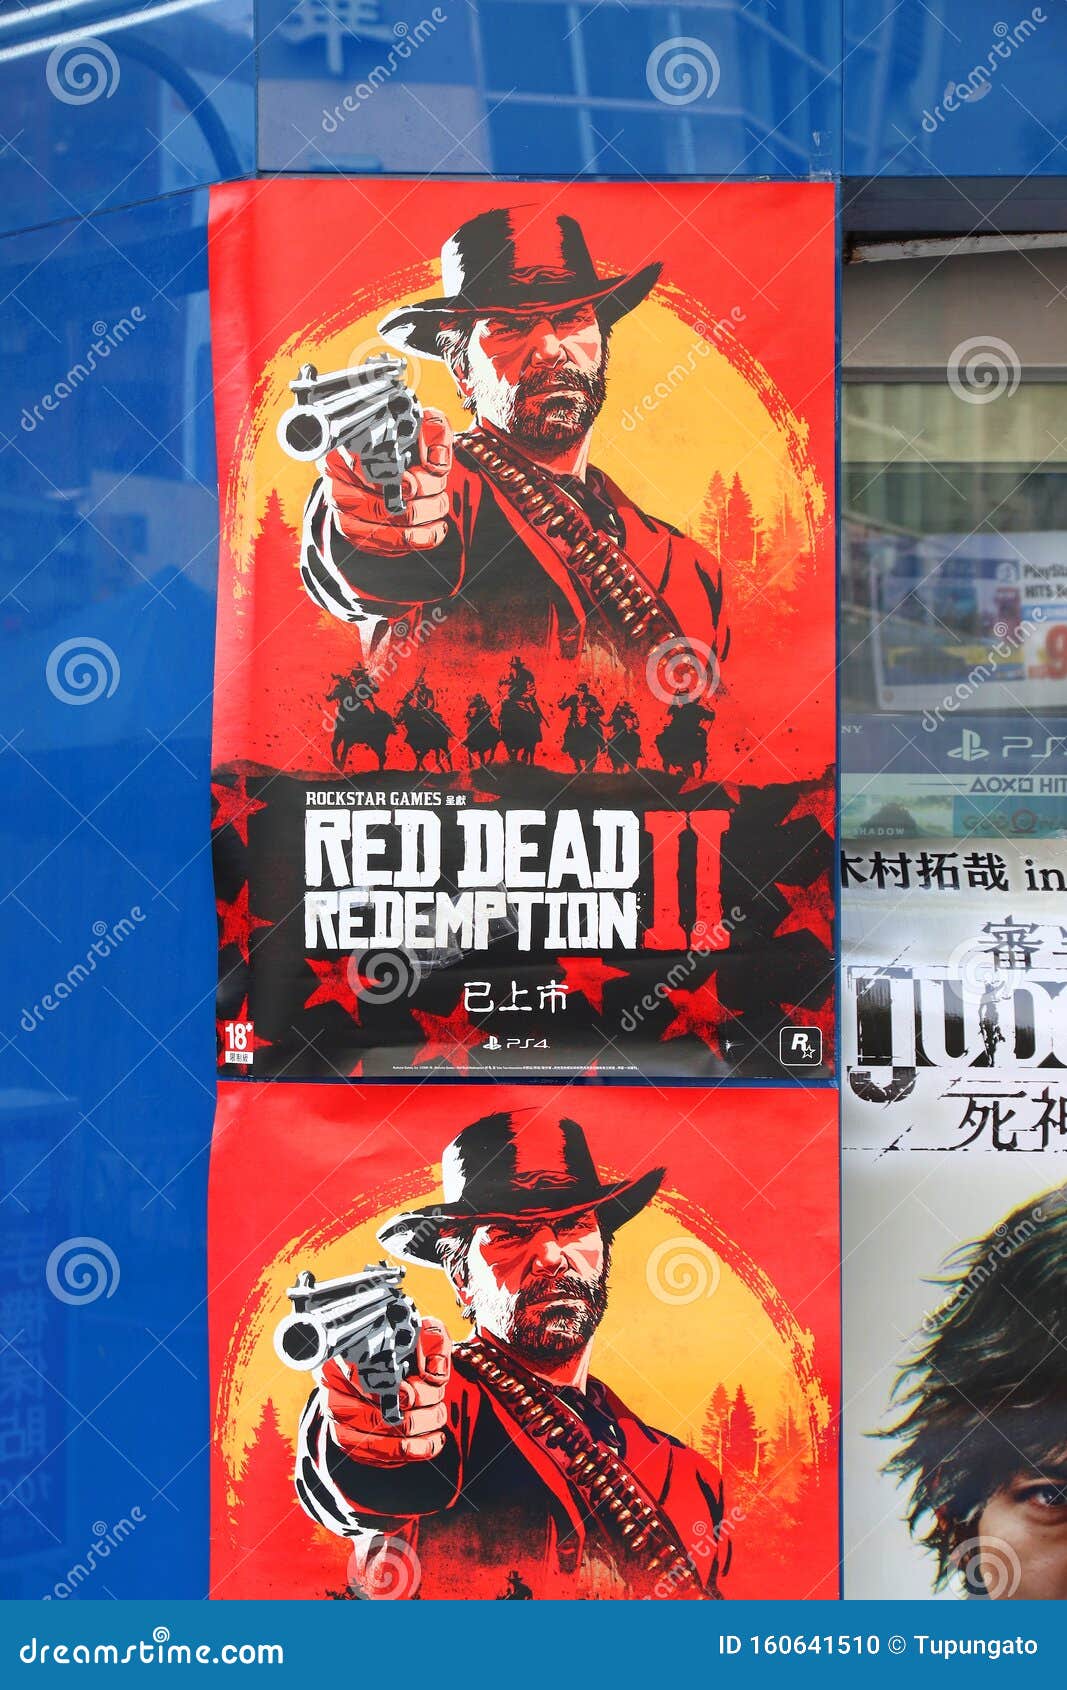 Dead Redemption II Poster Editorial - of taiwan, playstation: 160641510